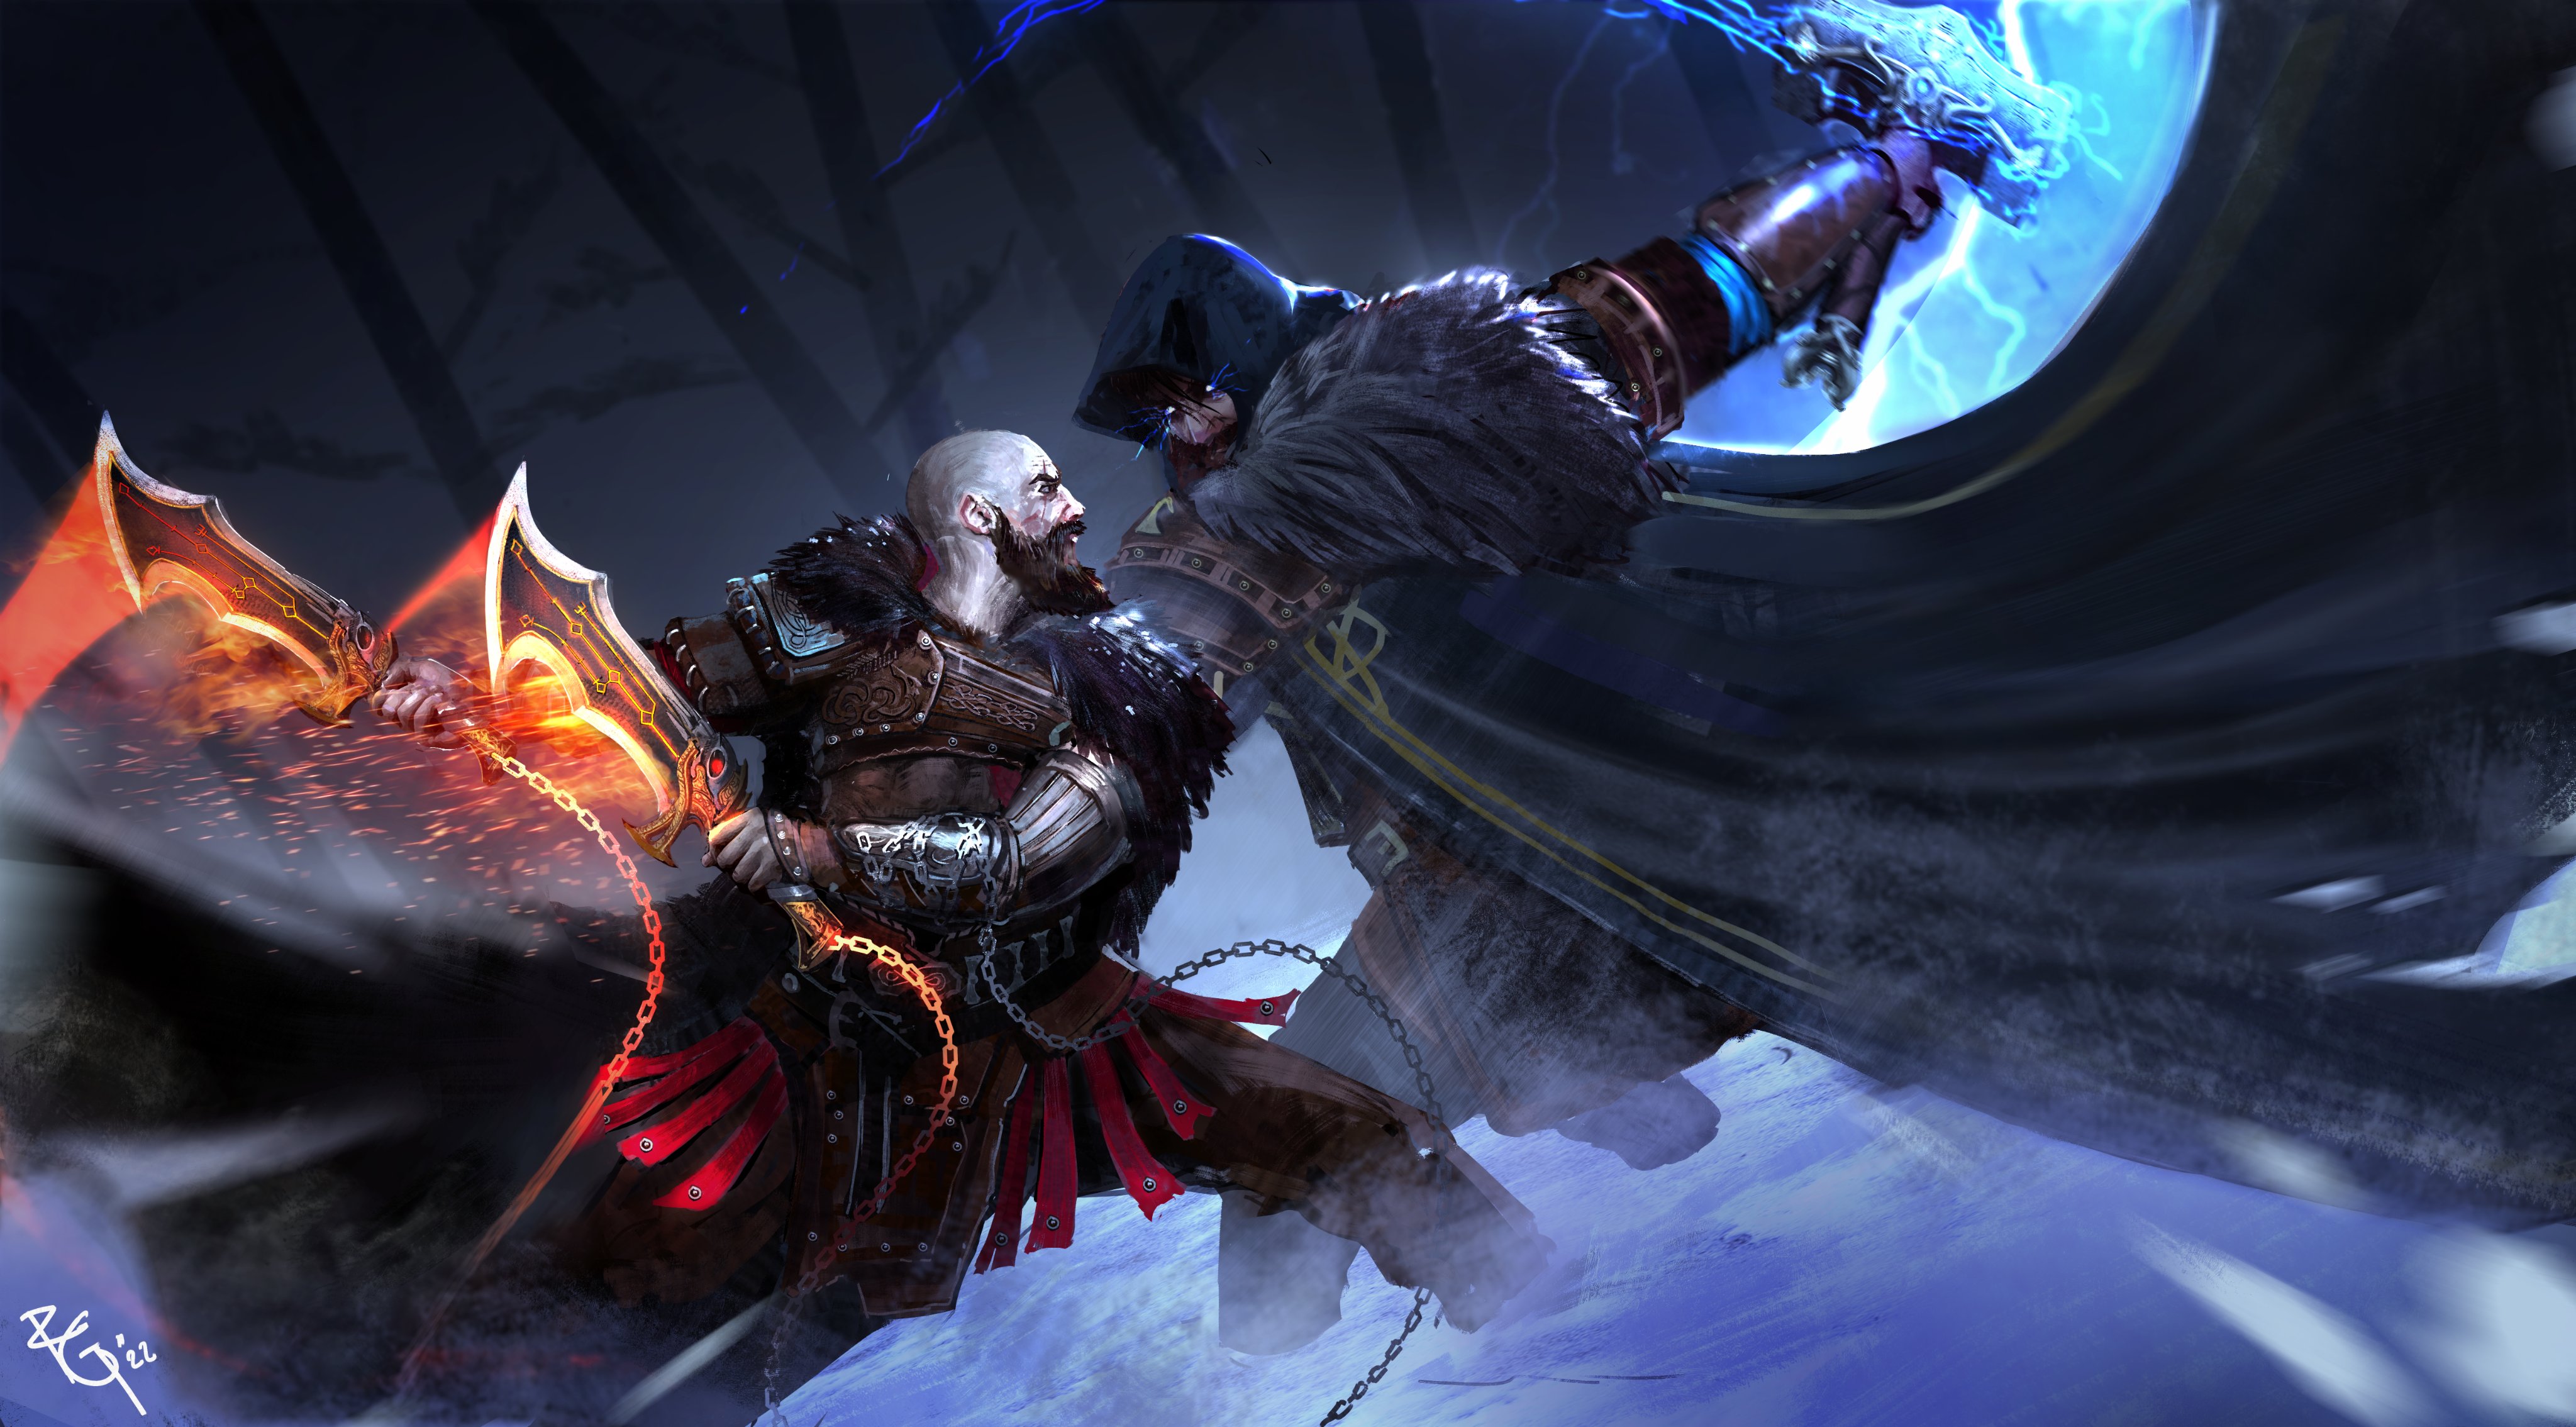 Kaptain Kuba to for getting 5th place on my #GodofWarRagnarok art contest This is an epic depiction of Kratos vs Thor